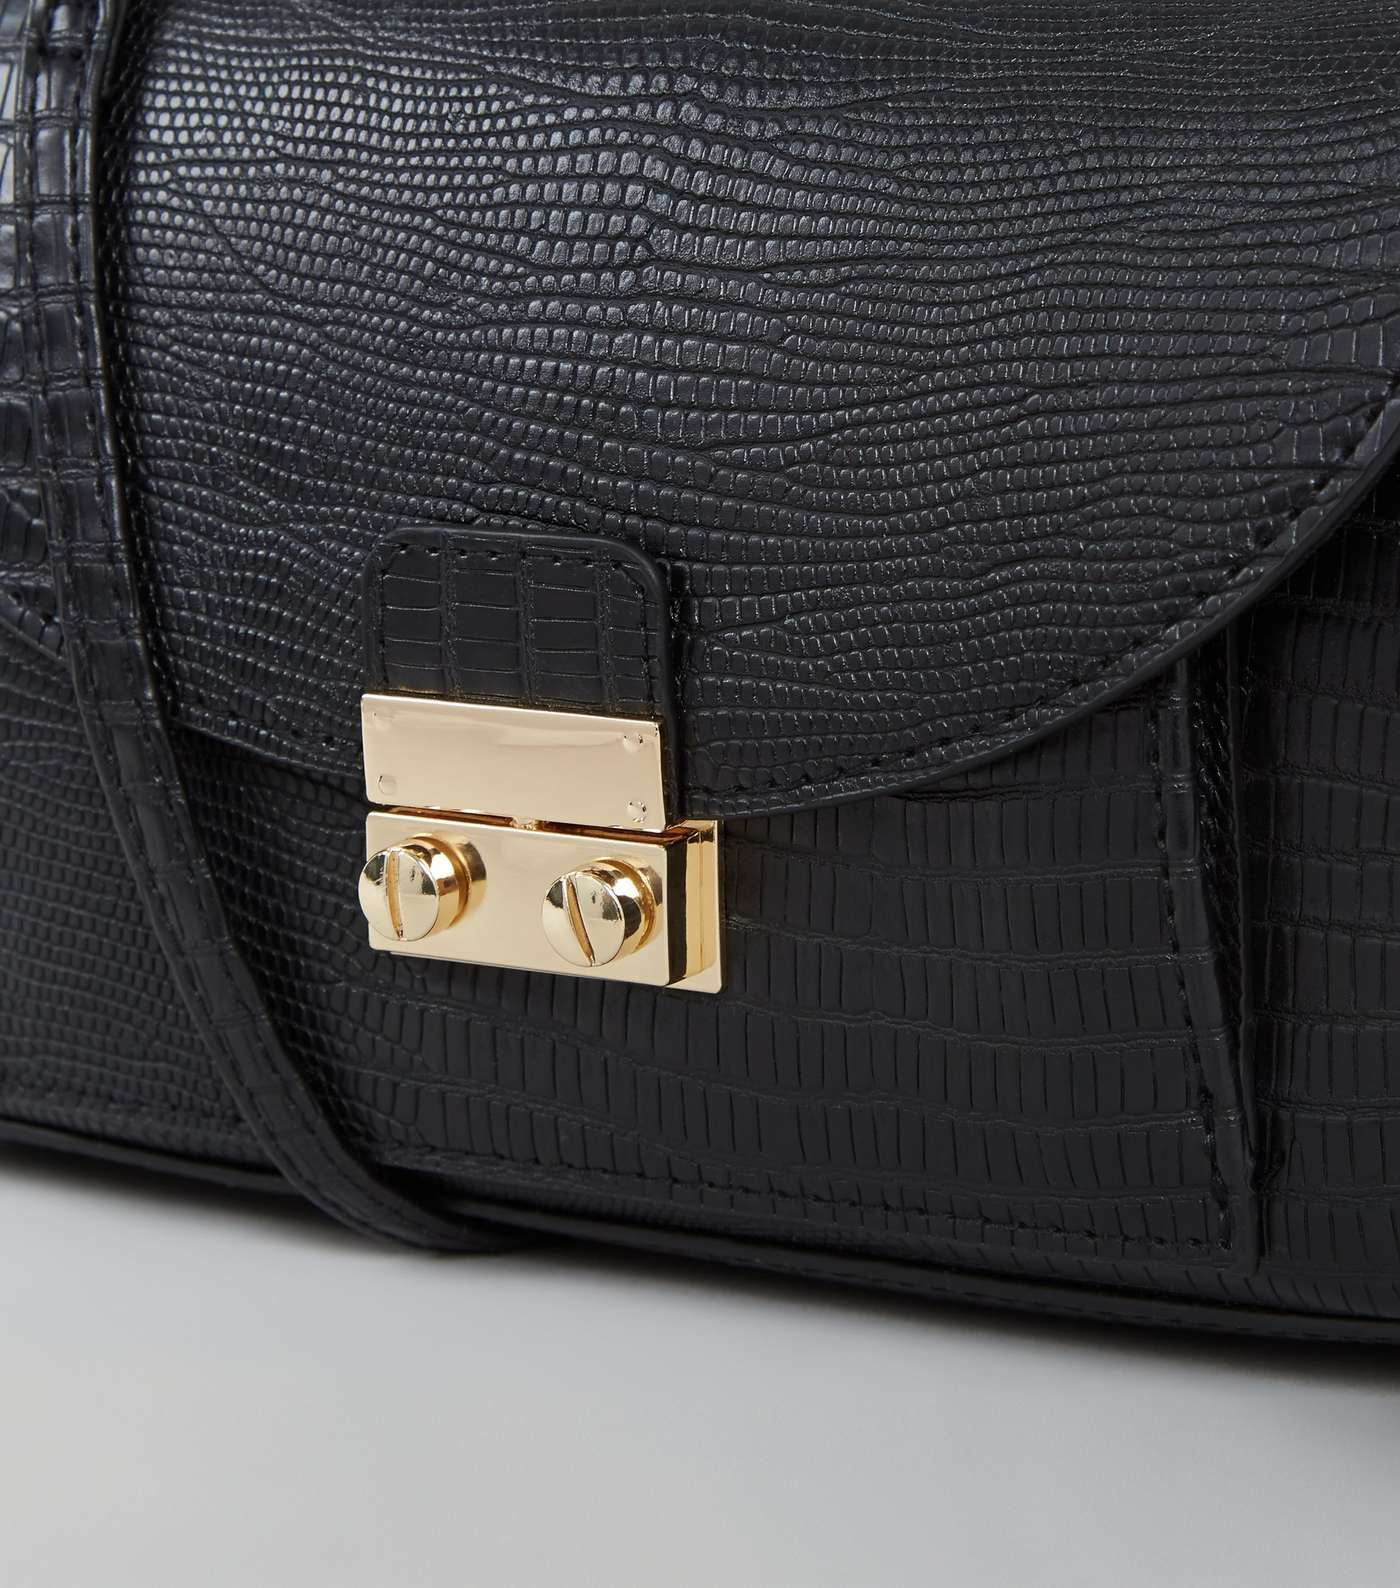 Black Leather-Look Buckle Strap Tote Bag Image 4